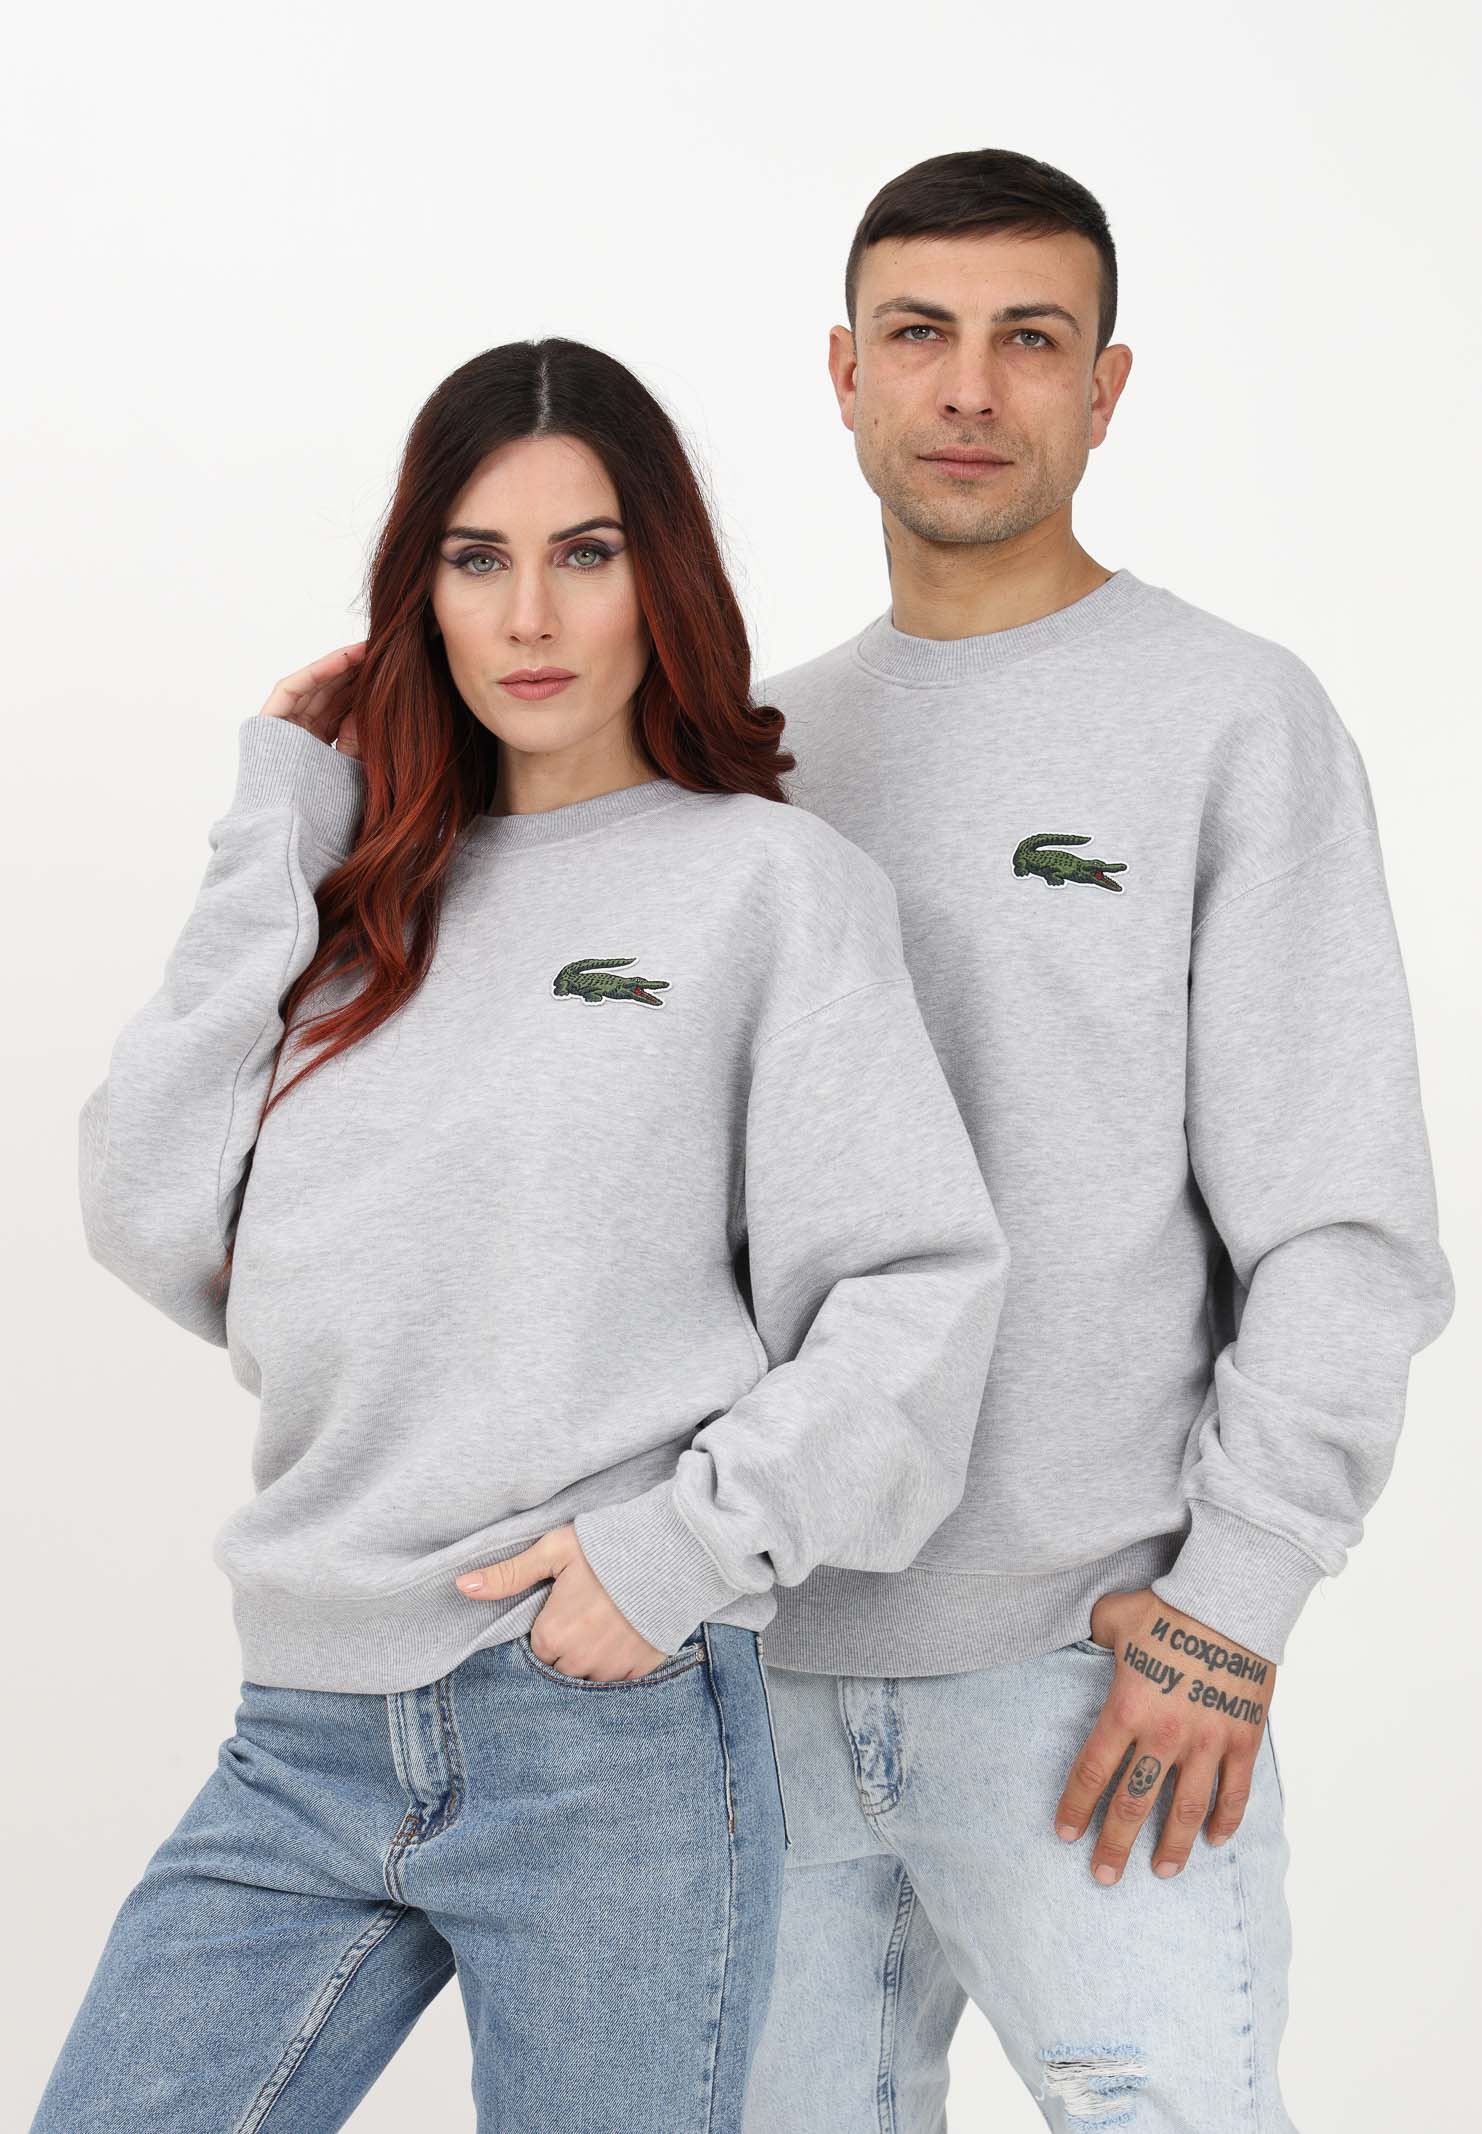 Gray crewneck sweatshirt for men and women with logo application LACOSTE | SH6405CCA